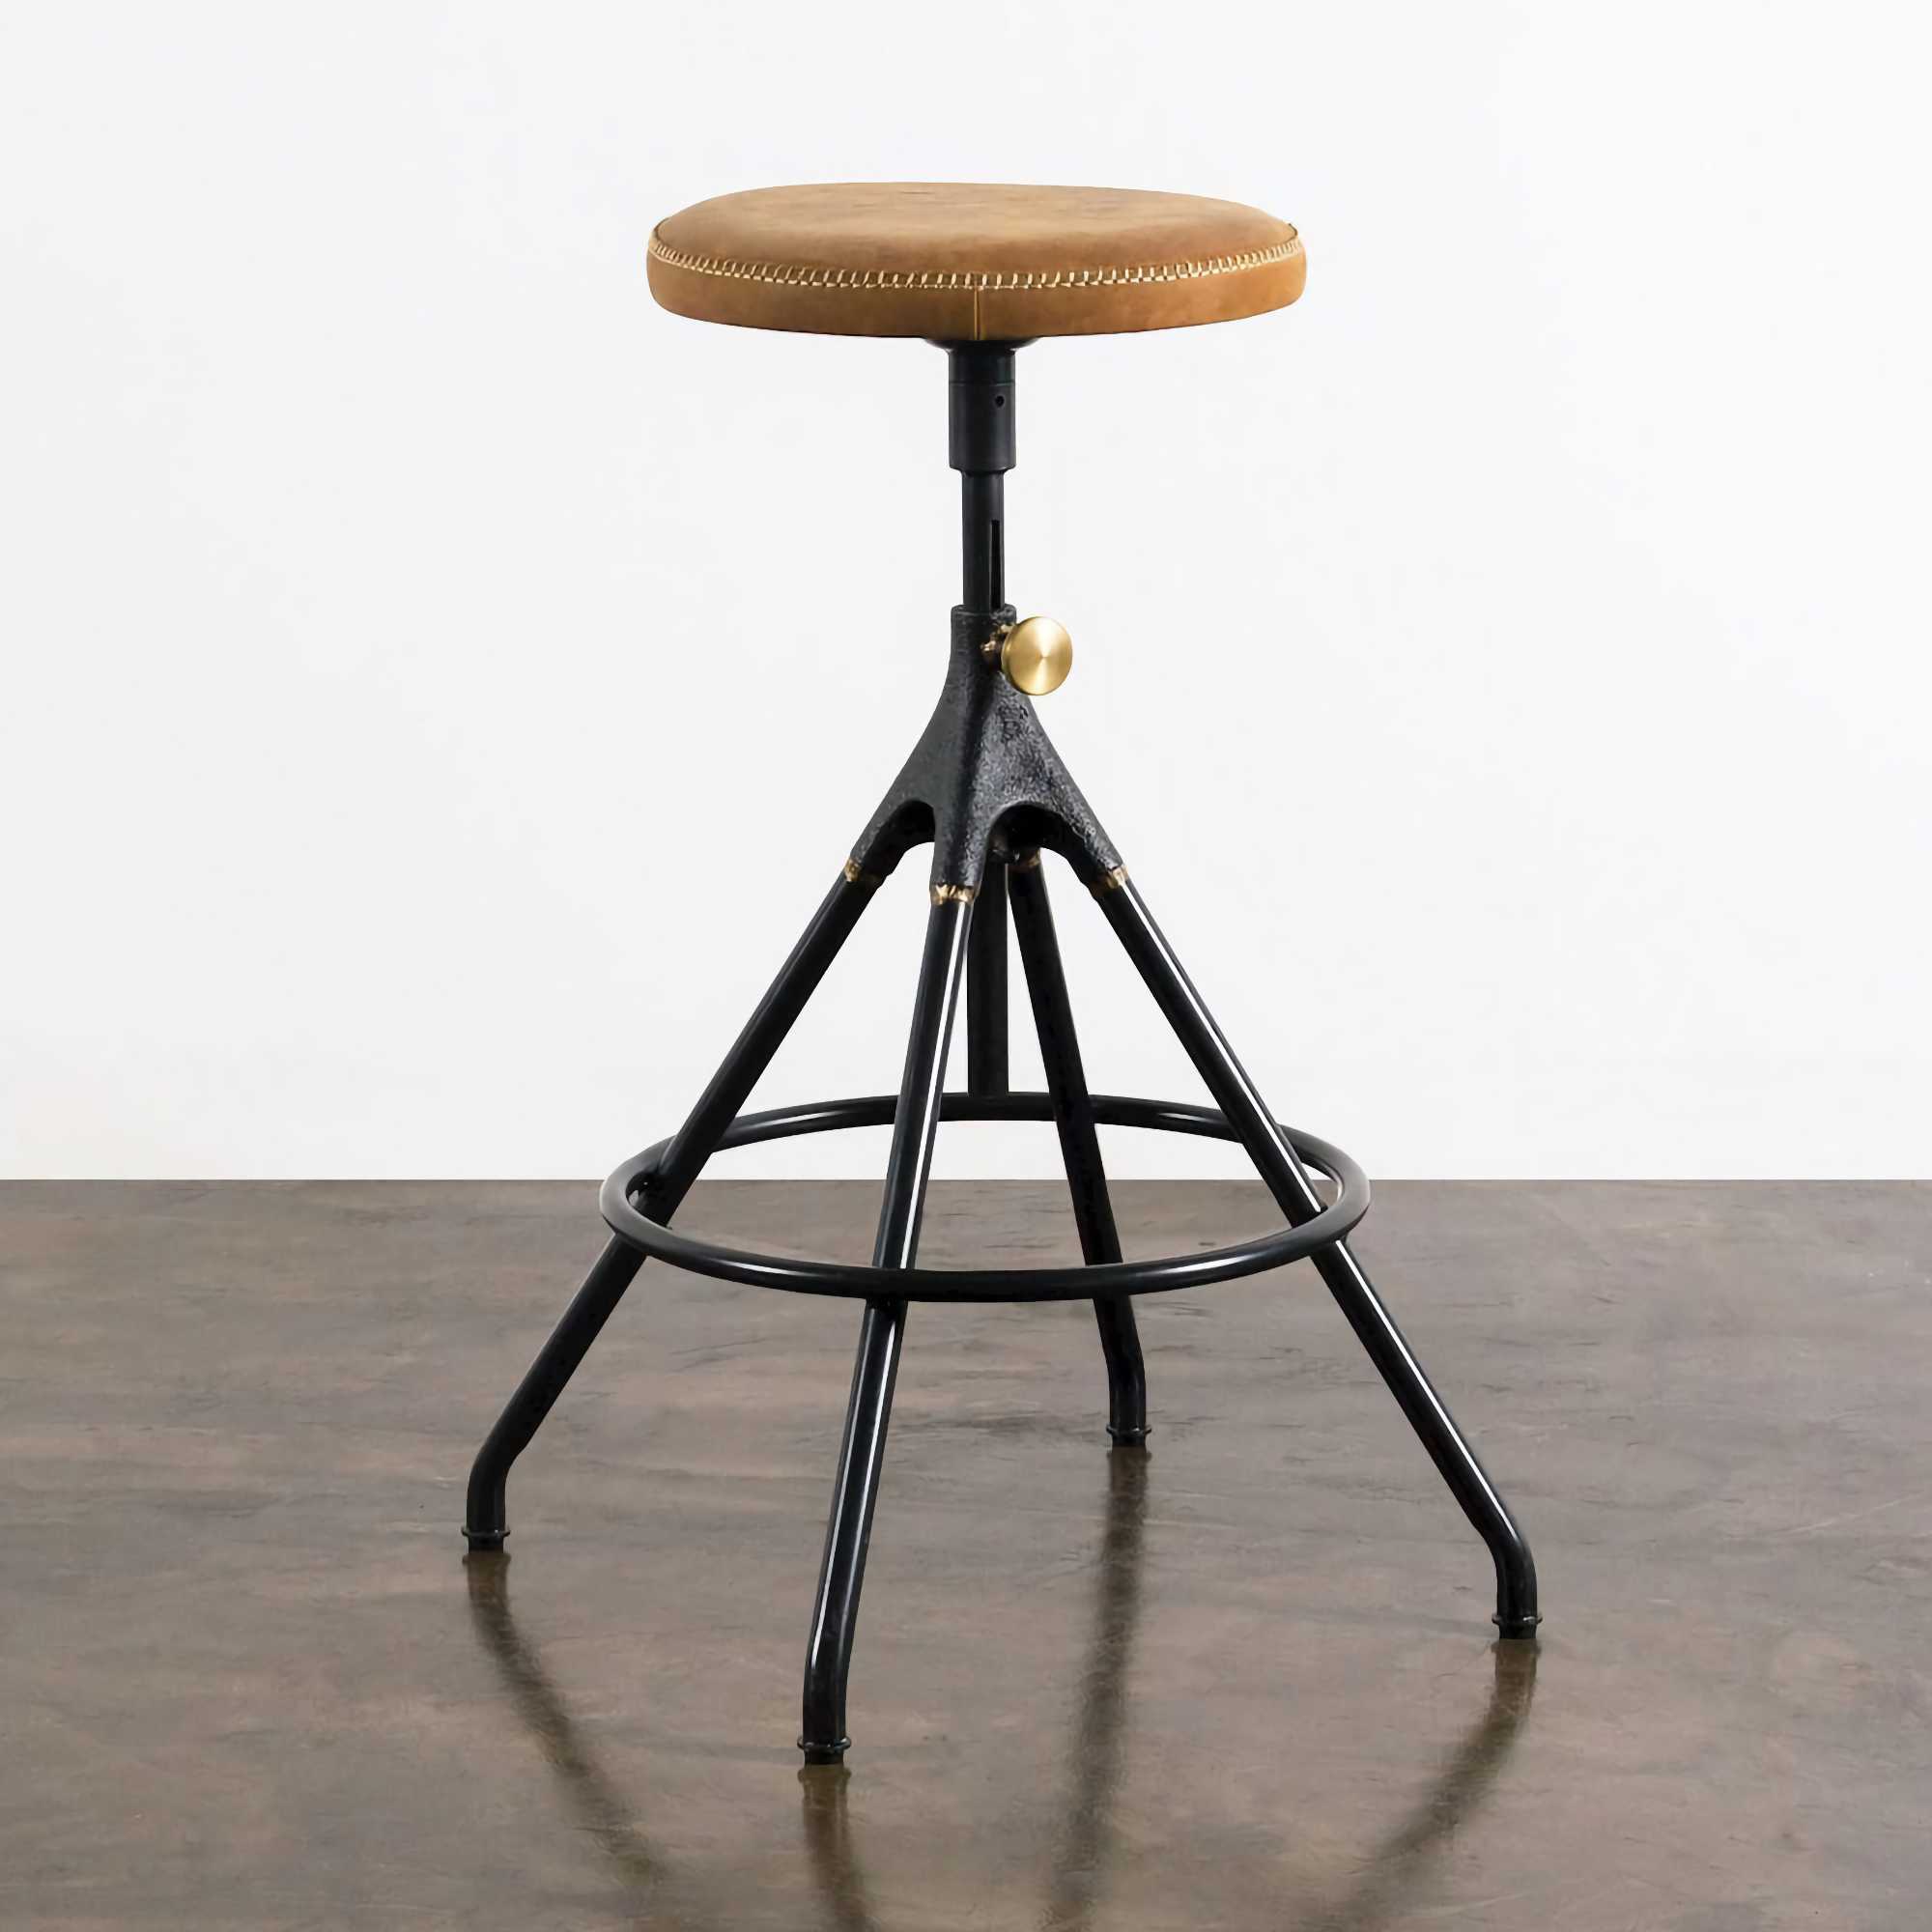 District Eight Akron Adjustable Bar Stool, umber tan leather